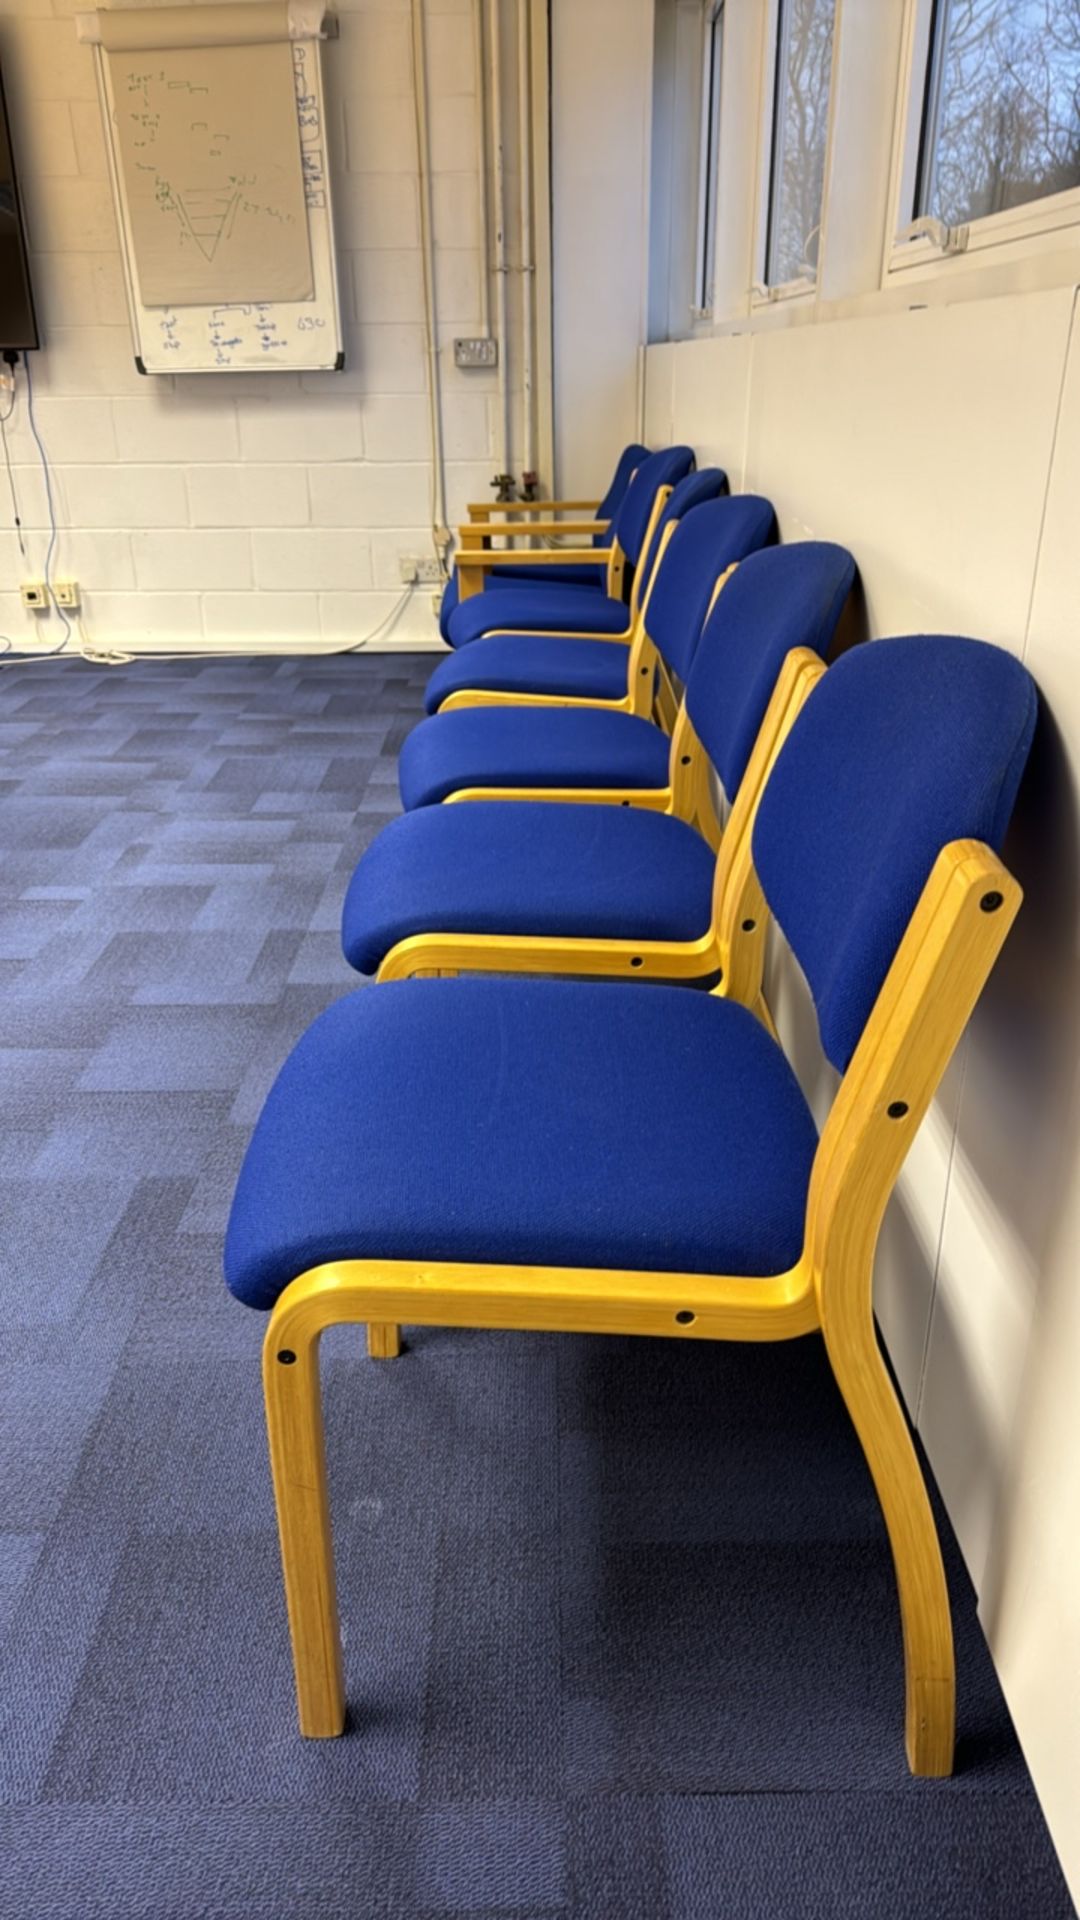 Set Of 7 Waiting Room Chairs - Image 4 of 4